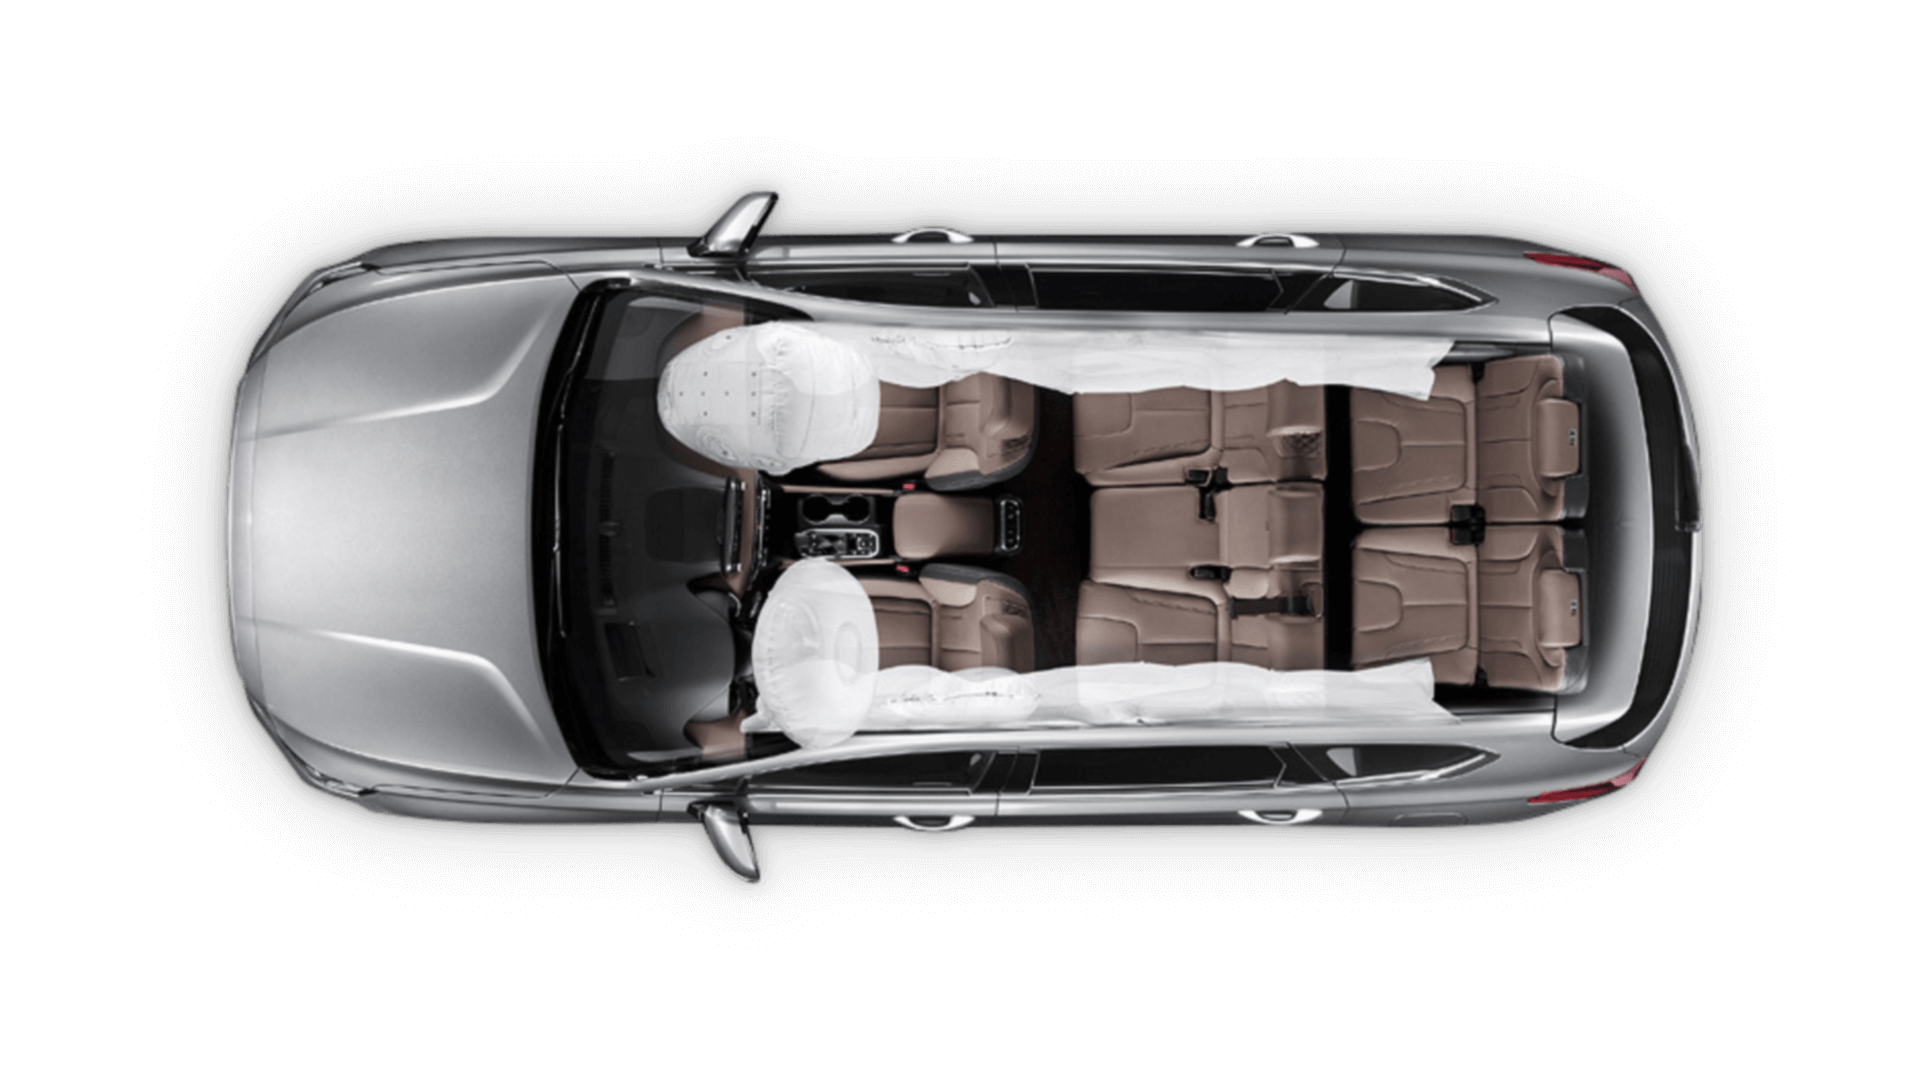 An illustration of the six airbags inside the new Hyundai Santa Fe.